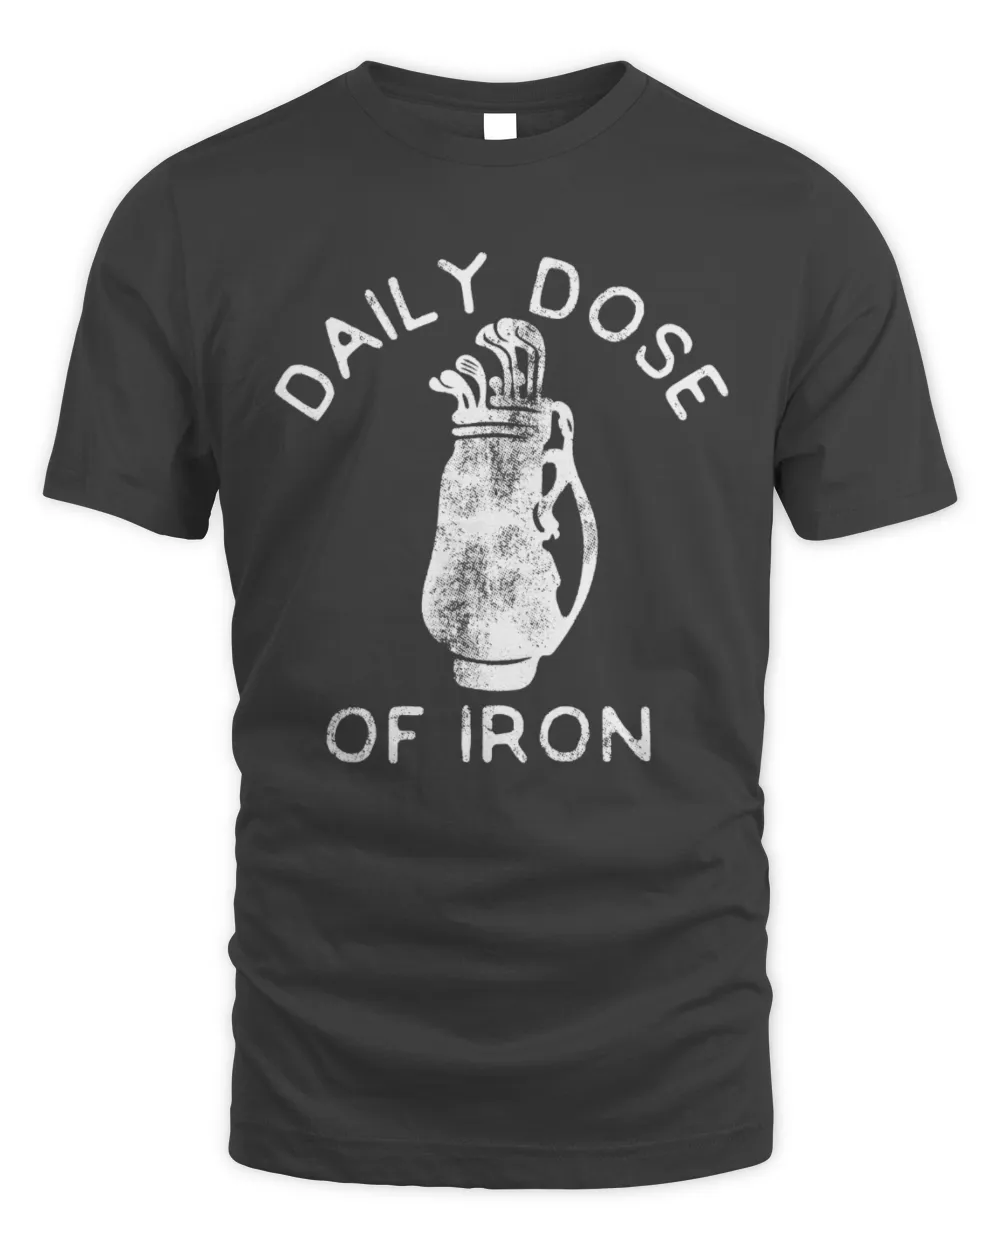 Funny Joke Golf Shirt, Golfing T Shirt Men, Dad Golfer Humor, Funny Shirts, Rude Offensive Gifts For Golfers, Daily Dose Of Iron